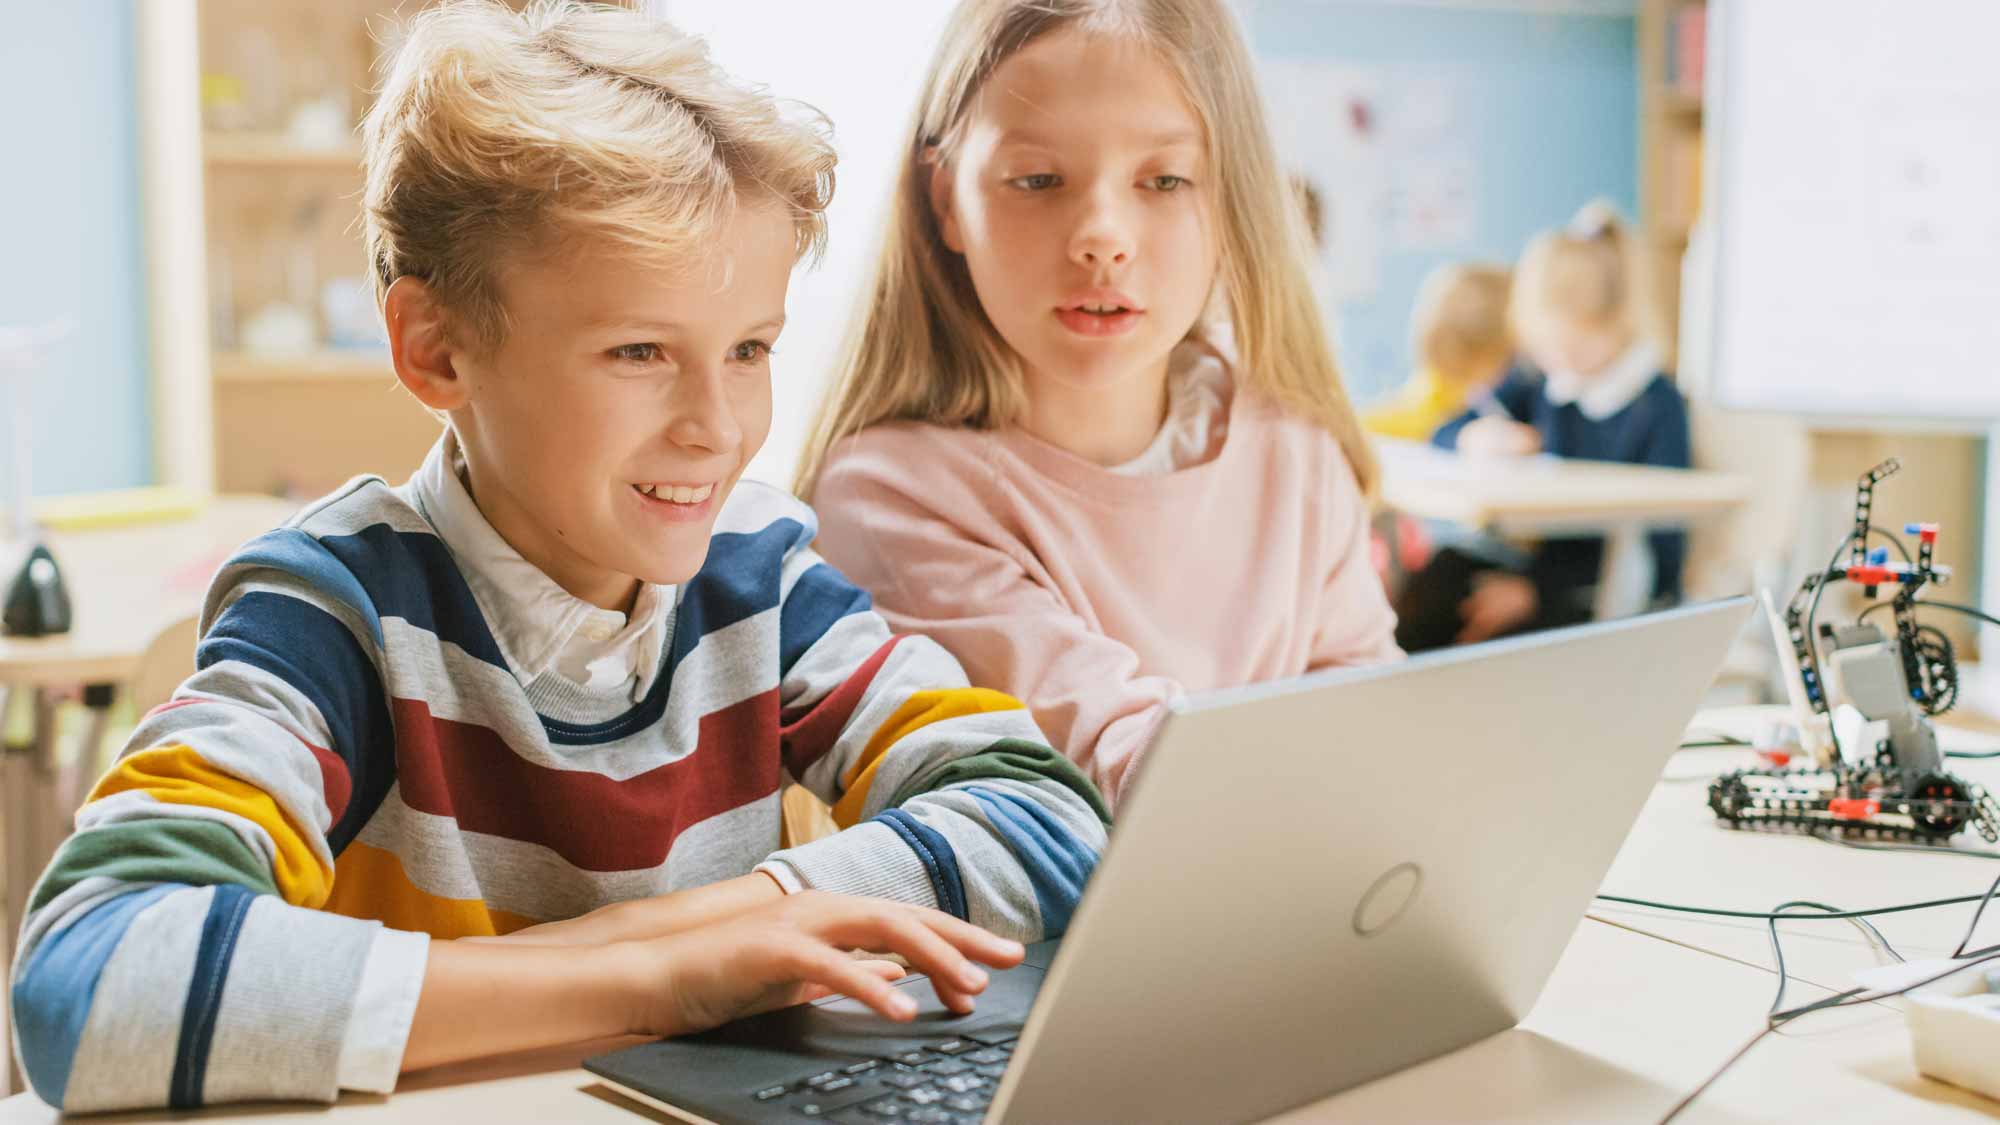 fun and interactive ways to teach kids coding and computer programming